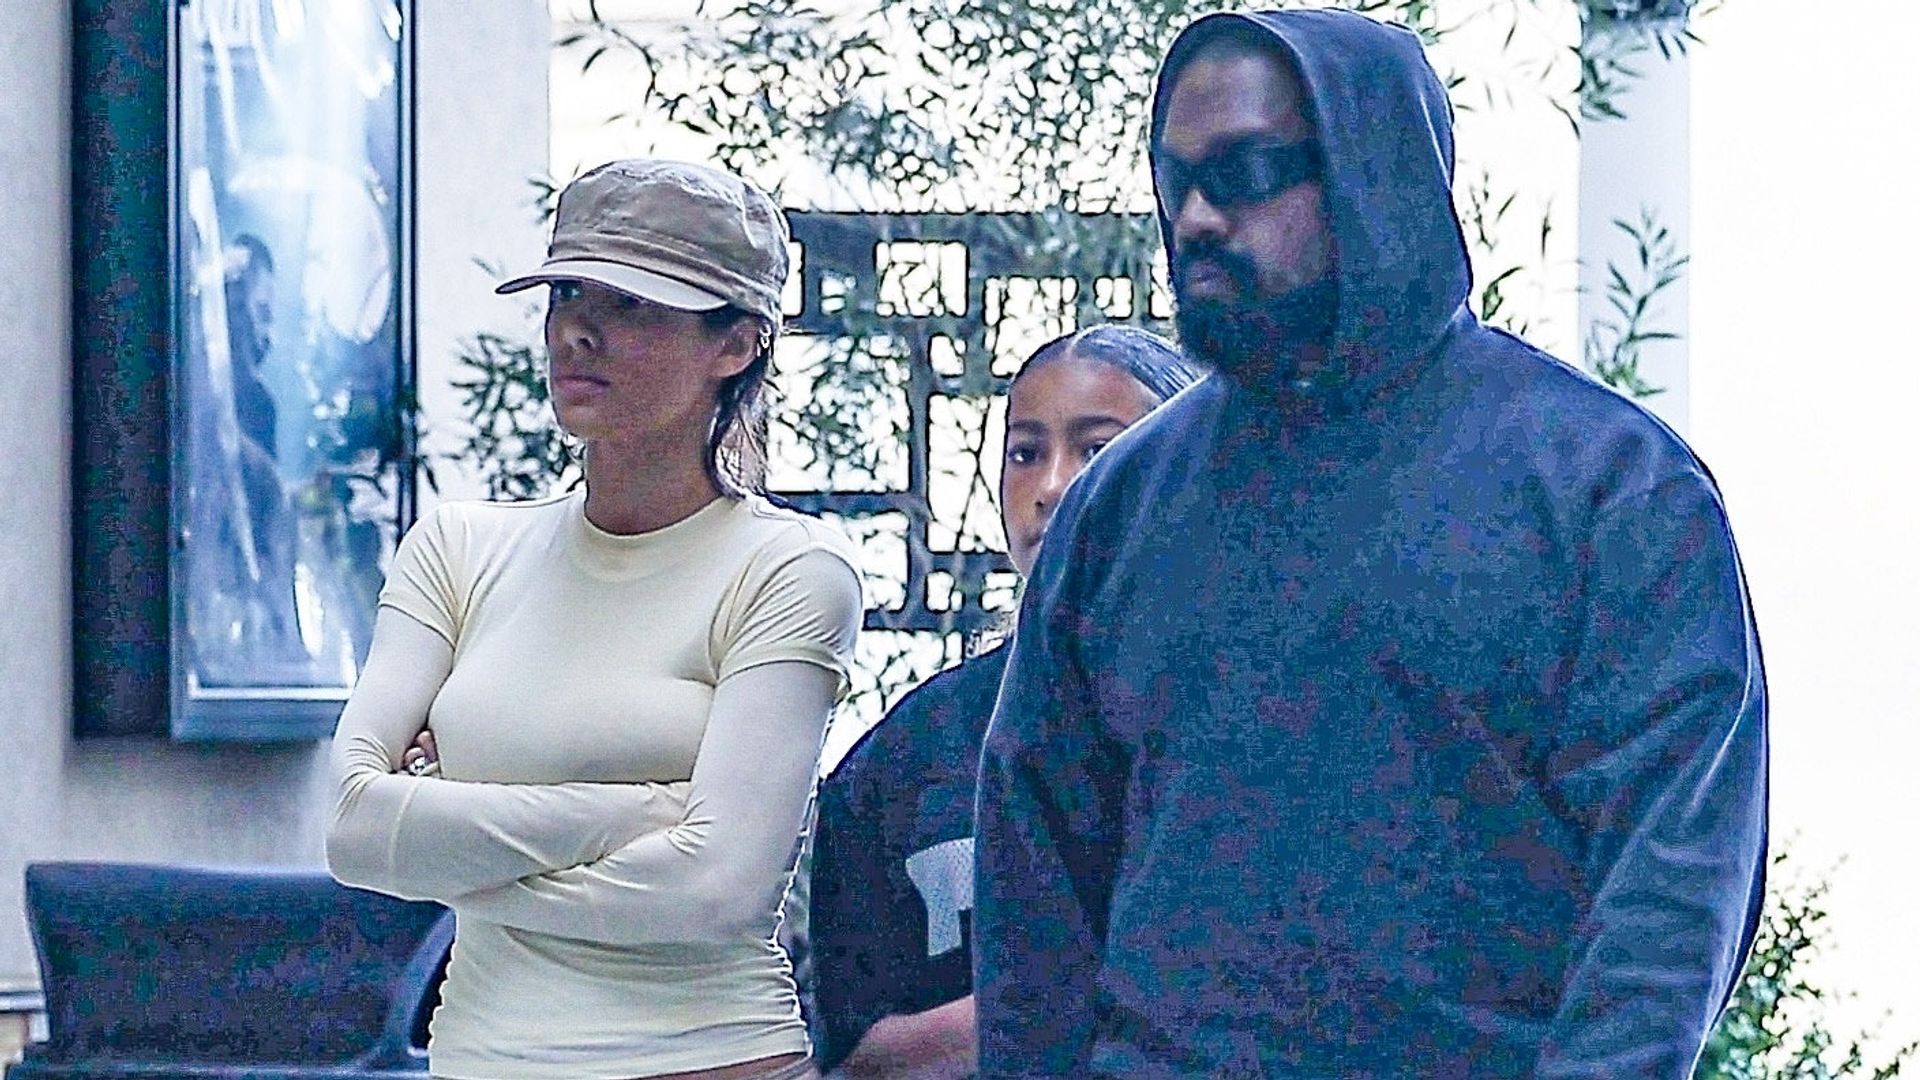 

Rapper Kanye West and wife Bianca Censori had a blast on a family outing, whisking his daughter North West away to catch the highly anticipated new 'Deadpool & Wolverine' movie in Los Angeles. 

Bianca only went half conservative in her outfit as she wore a long-sleeved shirt with nude underwear to match. It's been noted that Bianca has been asked to cover up her provocative outfits when around the children. 

Bianca also played up to her step-mom role as she was seen hugging her arms around North West before heading into iPic to catch the movie. The newly anticipated Marvel film 'Deadpool & Wolverine' is also rated R for mature adult scenes making a questionable choice for their 11-year-old daughter to accompany.****

Bianca solo se puso medio conservadora con su atuendo, ya que llevaba una camisa de manga larga con ropa interior color piel a juego. Se ha notado que le han pedido a Bianca que cubra sus provocativos atuendos cuando estÃ¡ cerca de los niÃ±os.

Bianca tambiÃ©n jugÃ³ a la altura de su papel de madrastra, ya que se la vio abrazando a North West antes de dirigirse a iPic para ver la pelÃ­cula. La nueva y esperada pelÃ­cula de Marvel 'Deadpool & Wolverine' tambiÃ©n estÃ¡ clasificada R por escenas para adultos maduros, lo que hace que sea una elecciÃ³n cuestionable que su hija de 11 aÃ±os la acompaÃ±e.